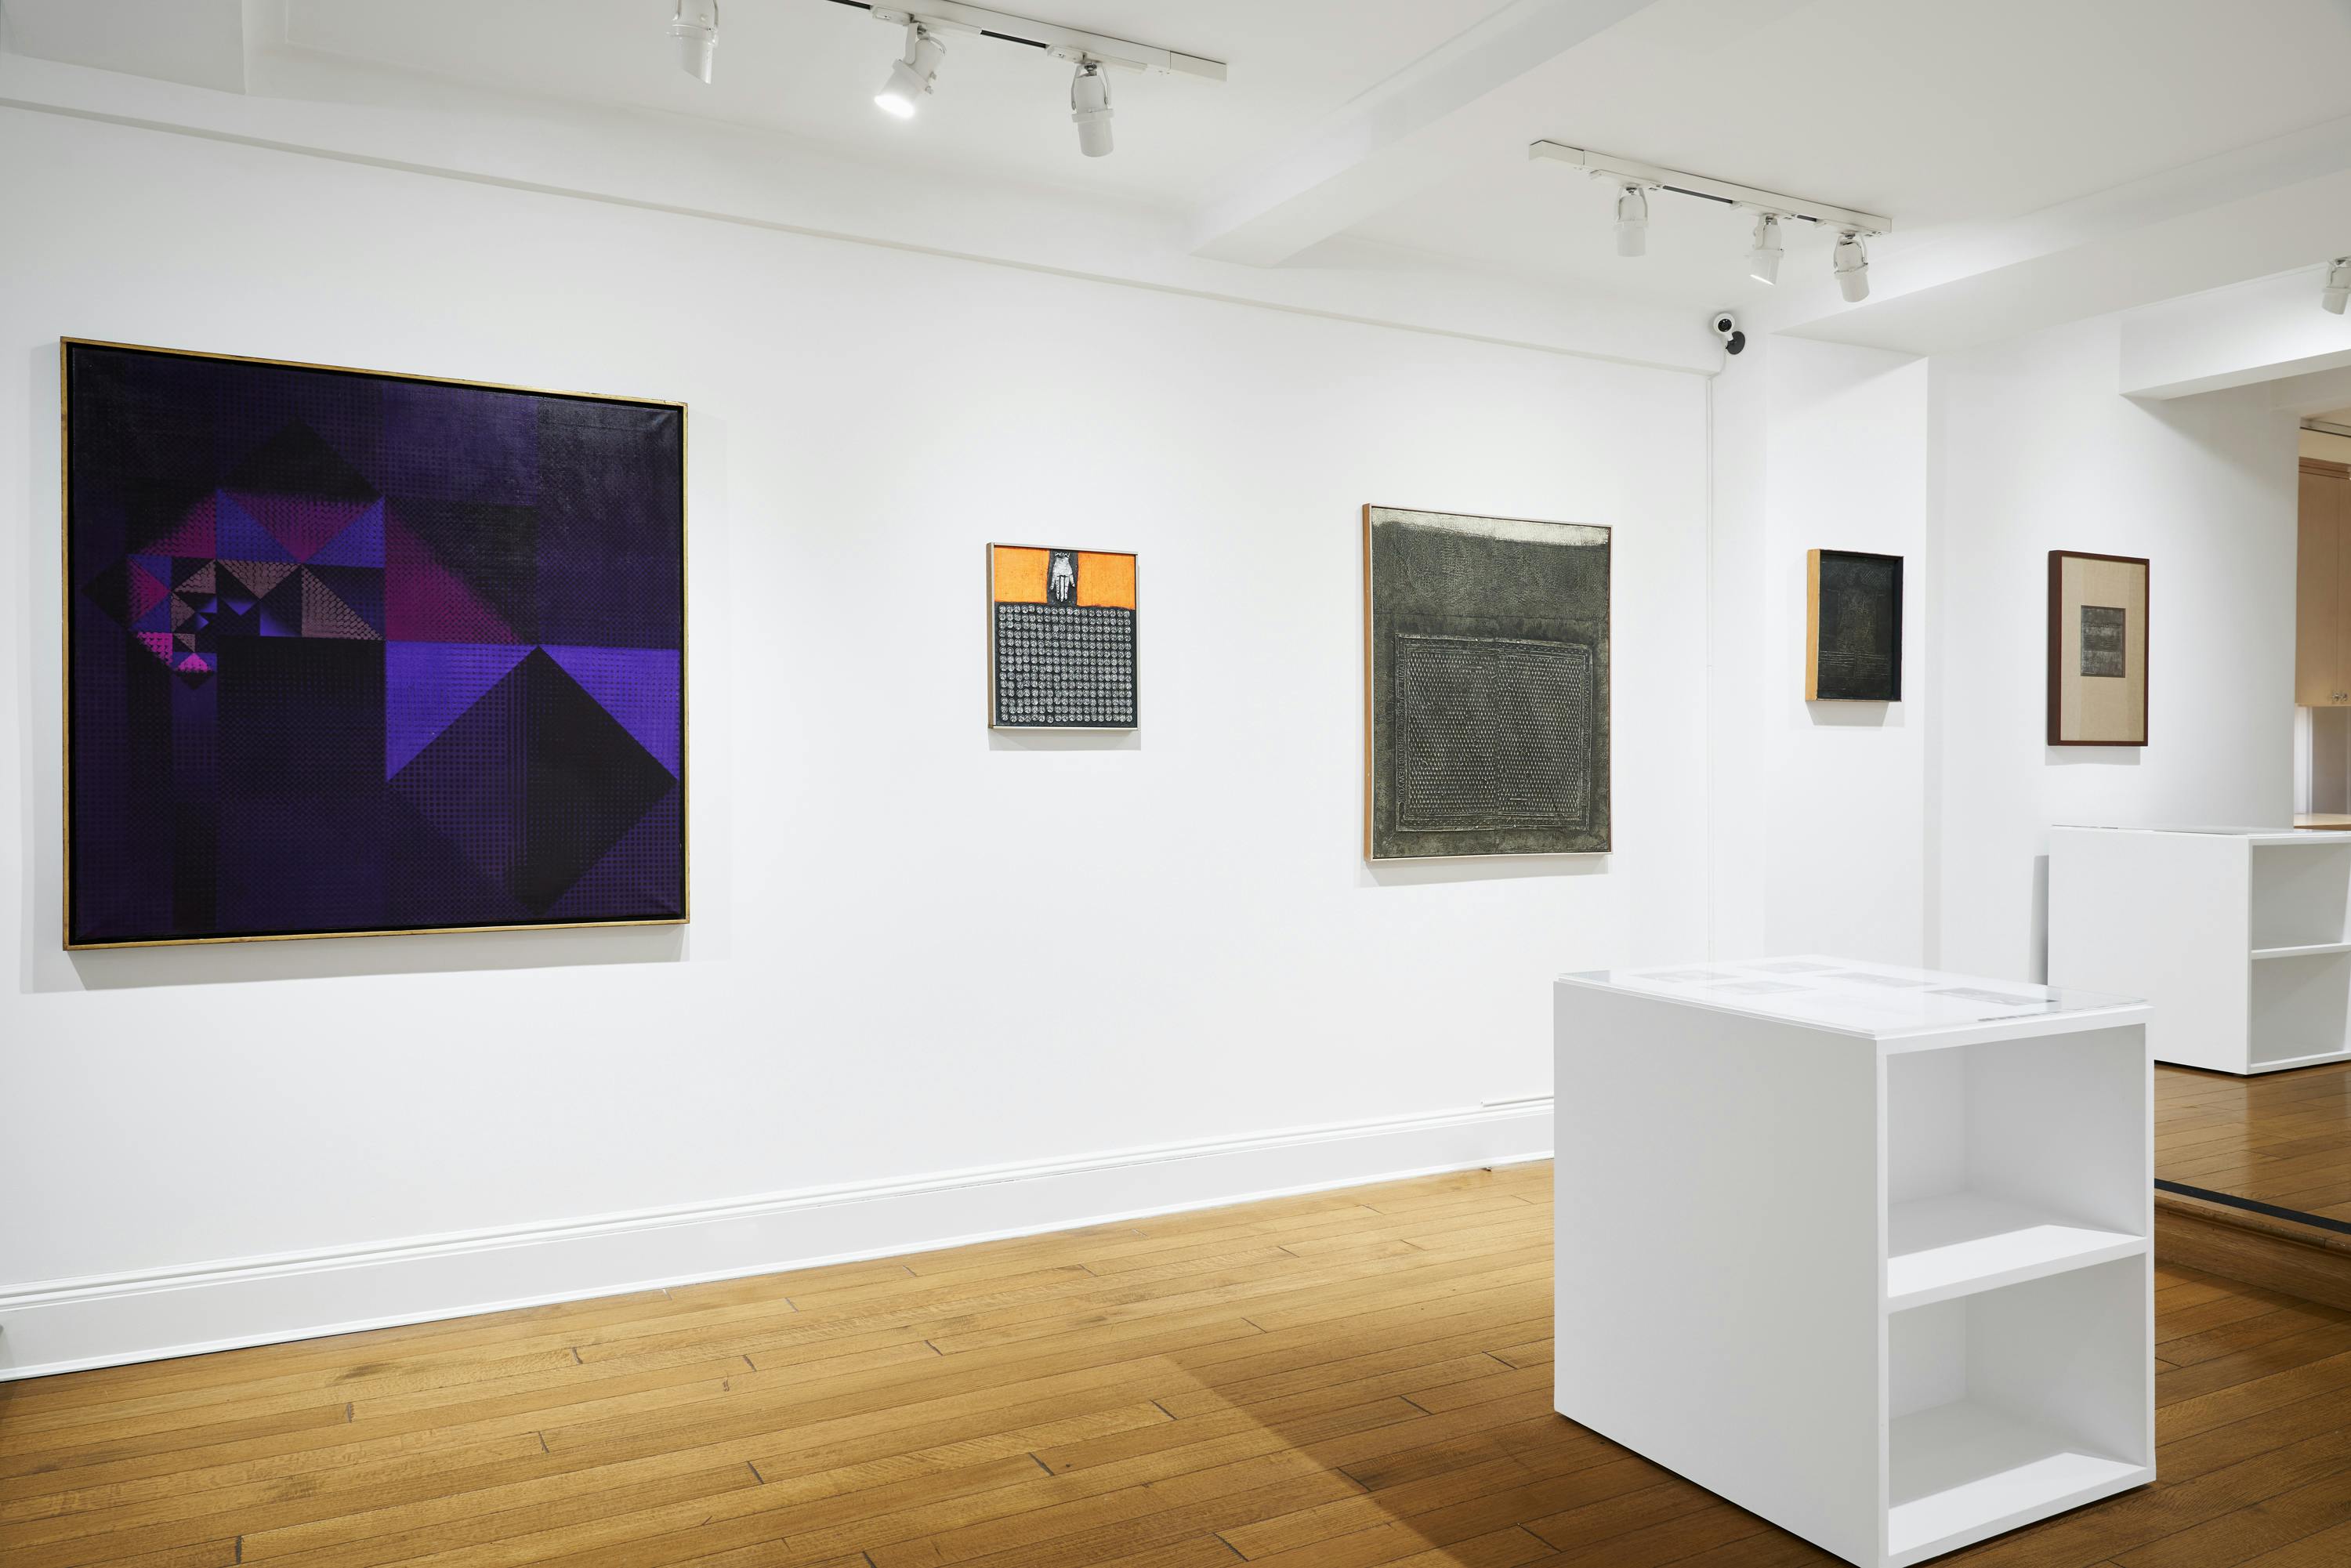 Installation view of five paintings by José Antonio Fernández-Muro and two vitrines.